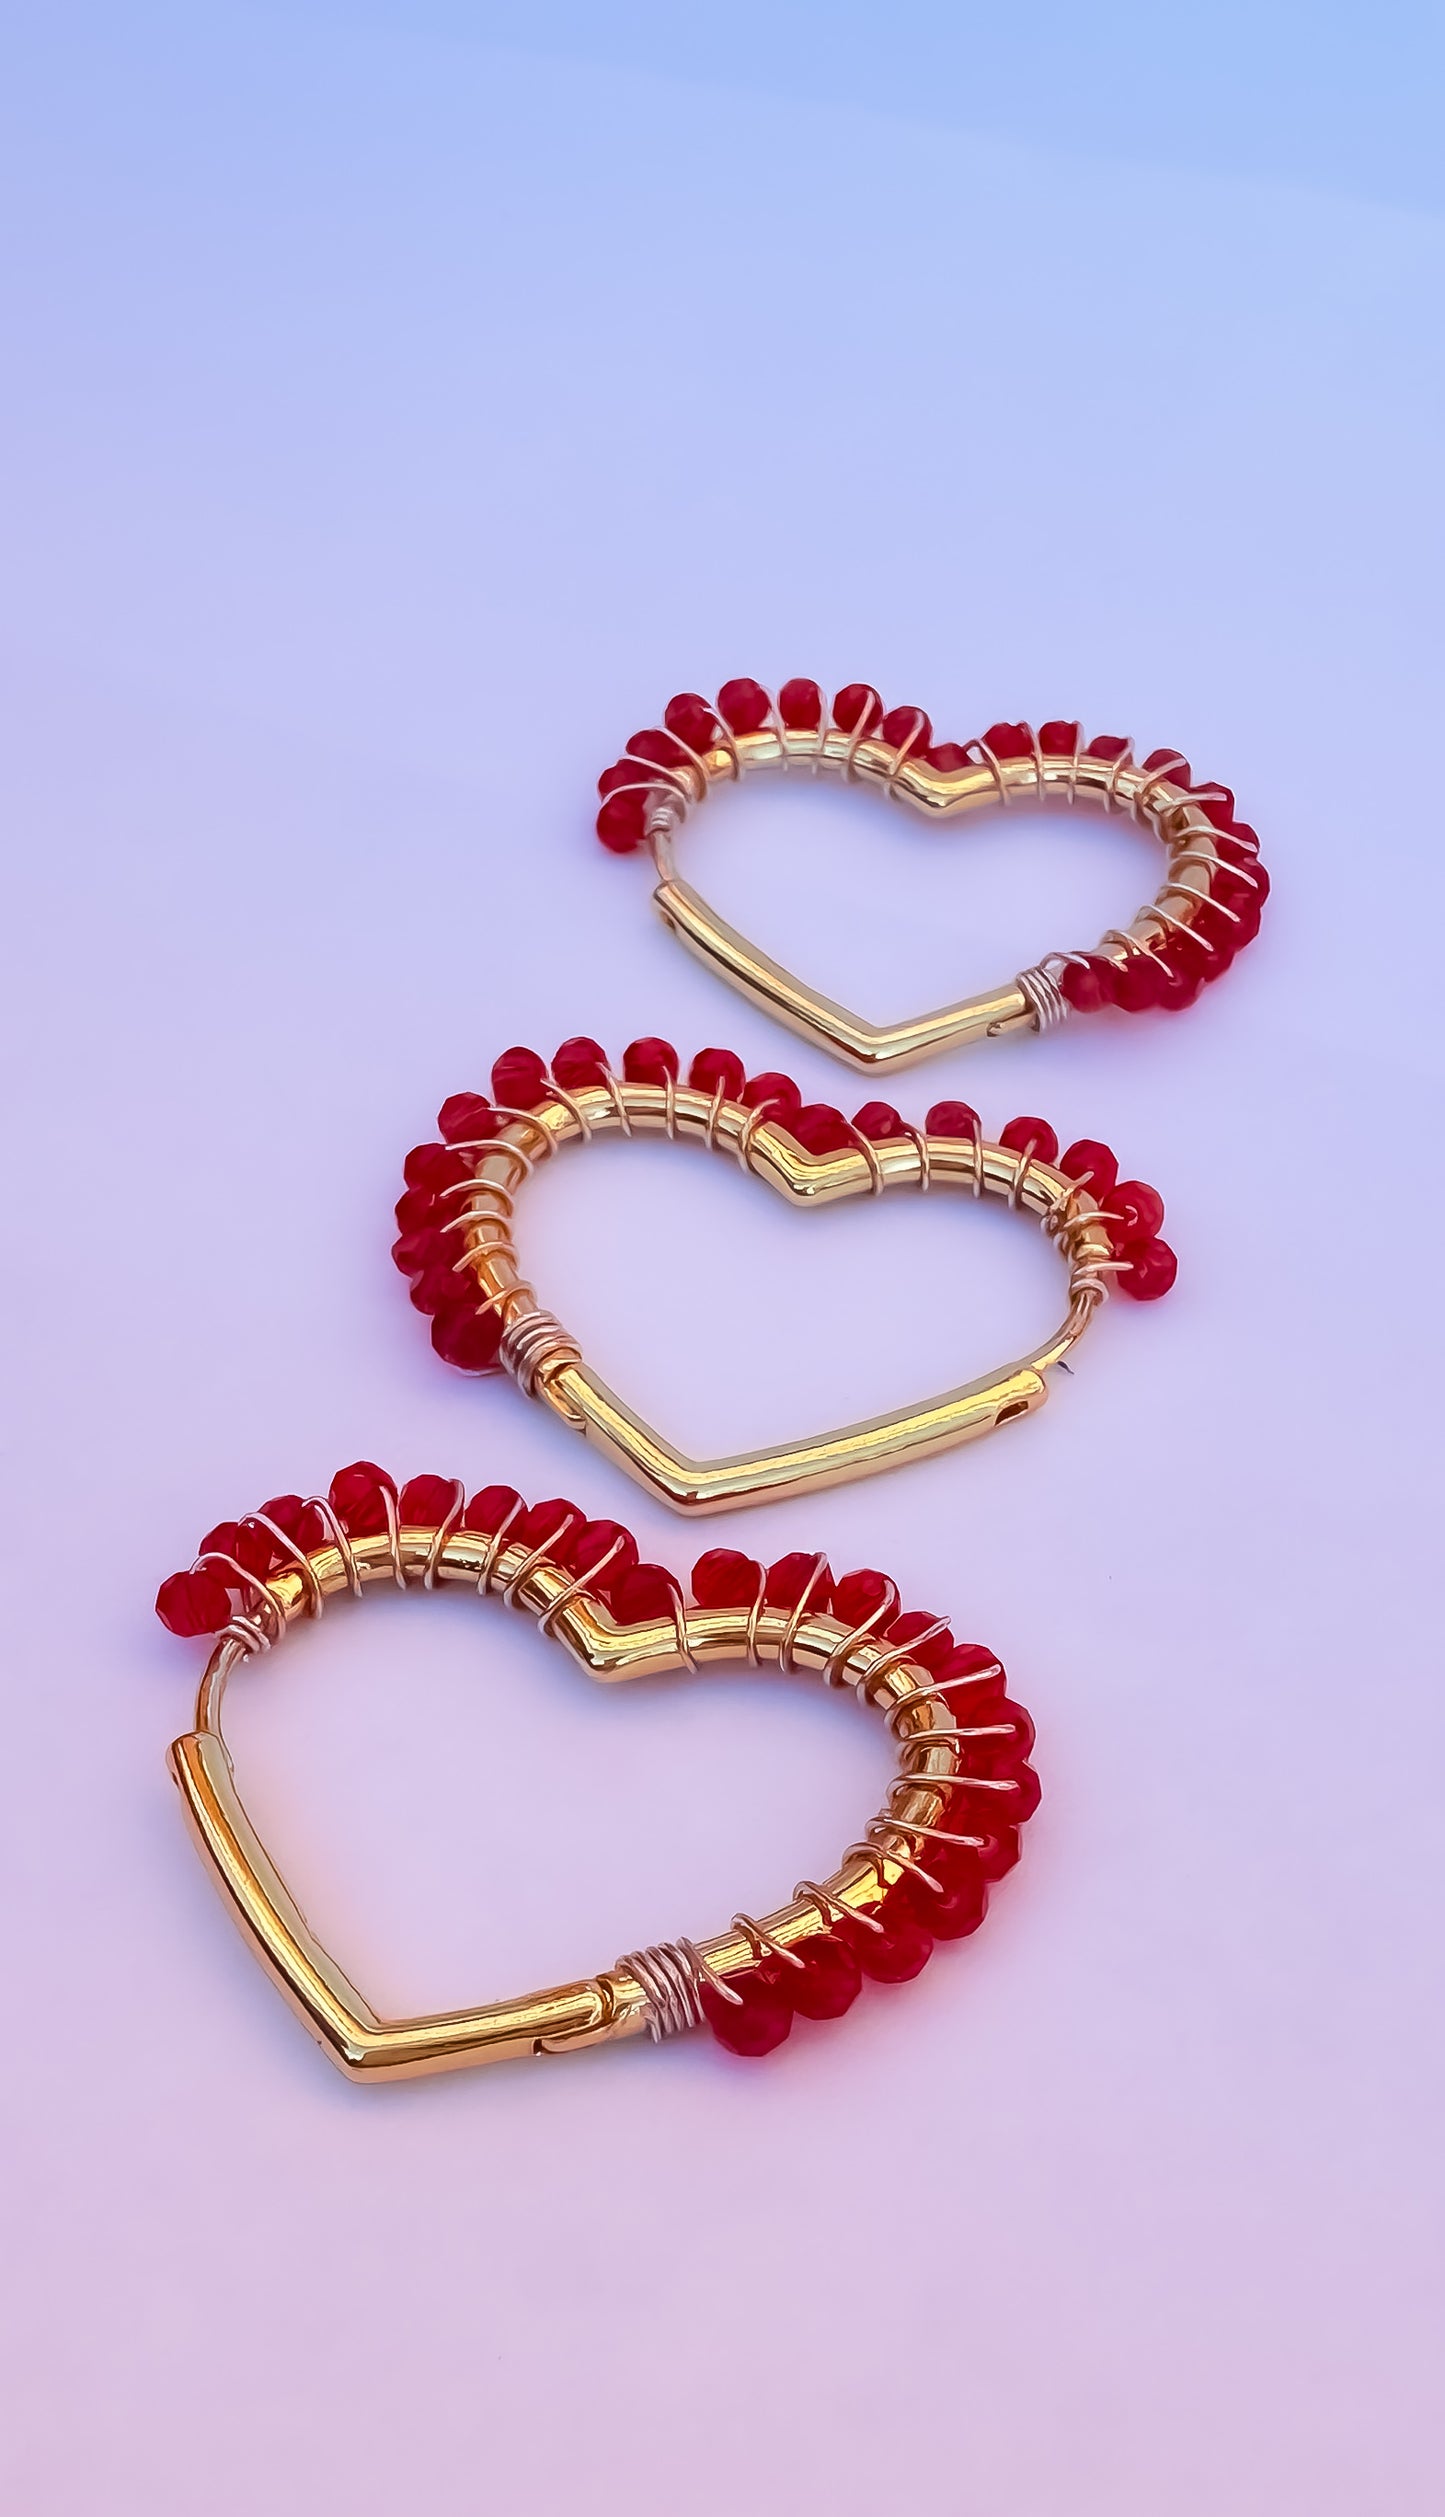 925 Silver Hoop Earrings with Cherry Red Czech Beads